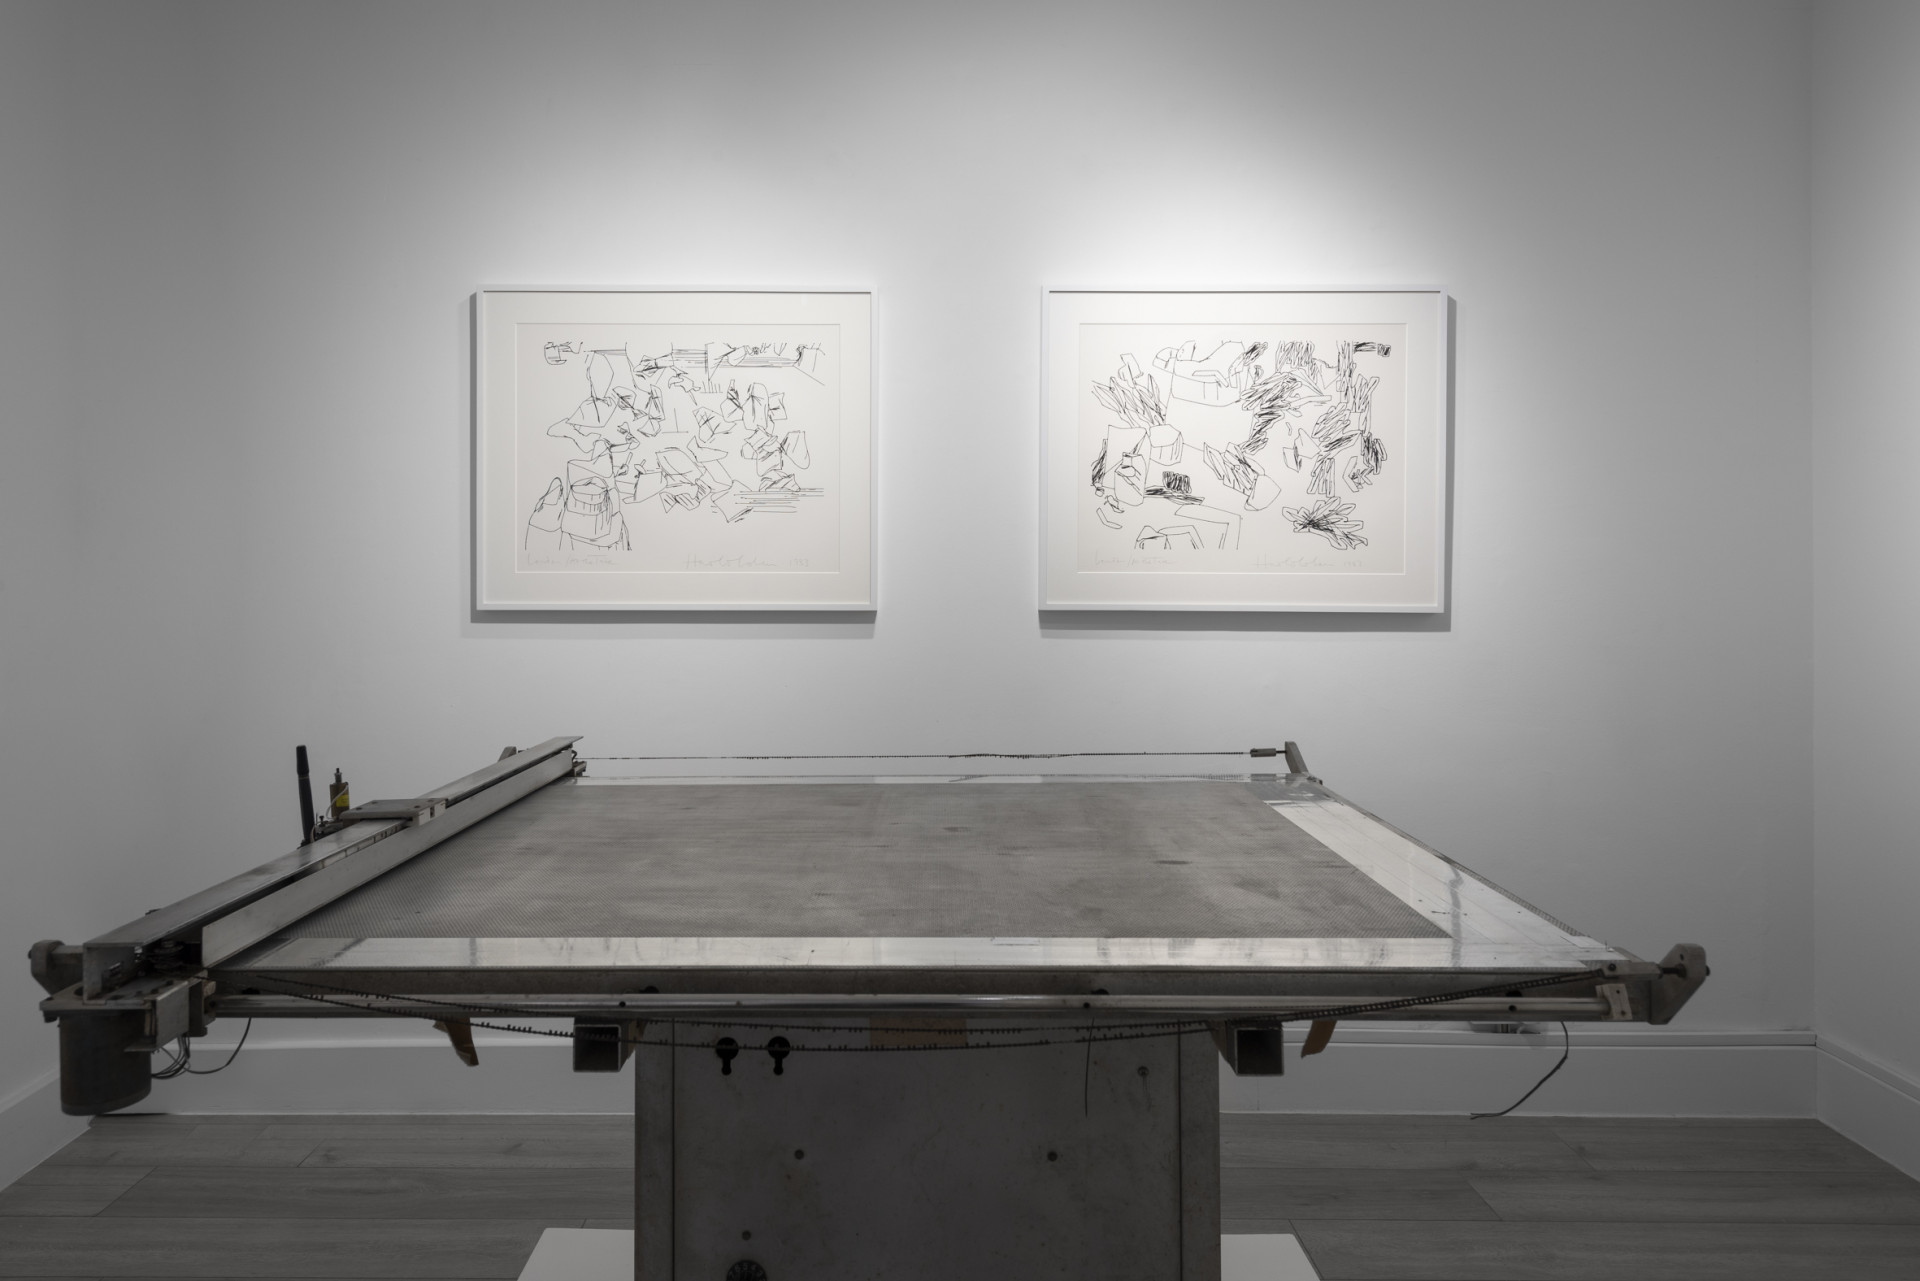 Install shot of a white cube gallery with a grey drawing machine in the foreground and two framed black-and-white doodles hanging on the wall behind